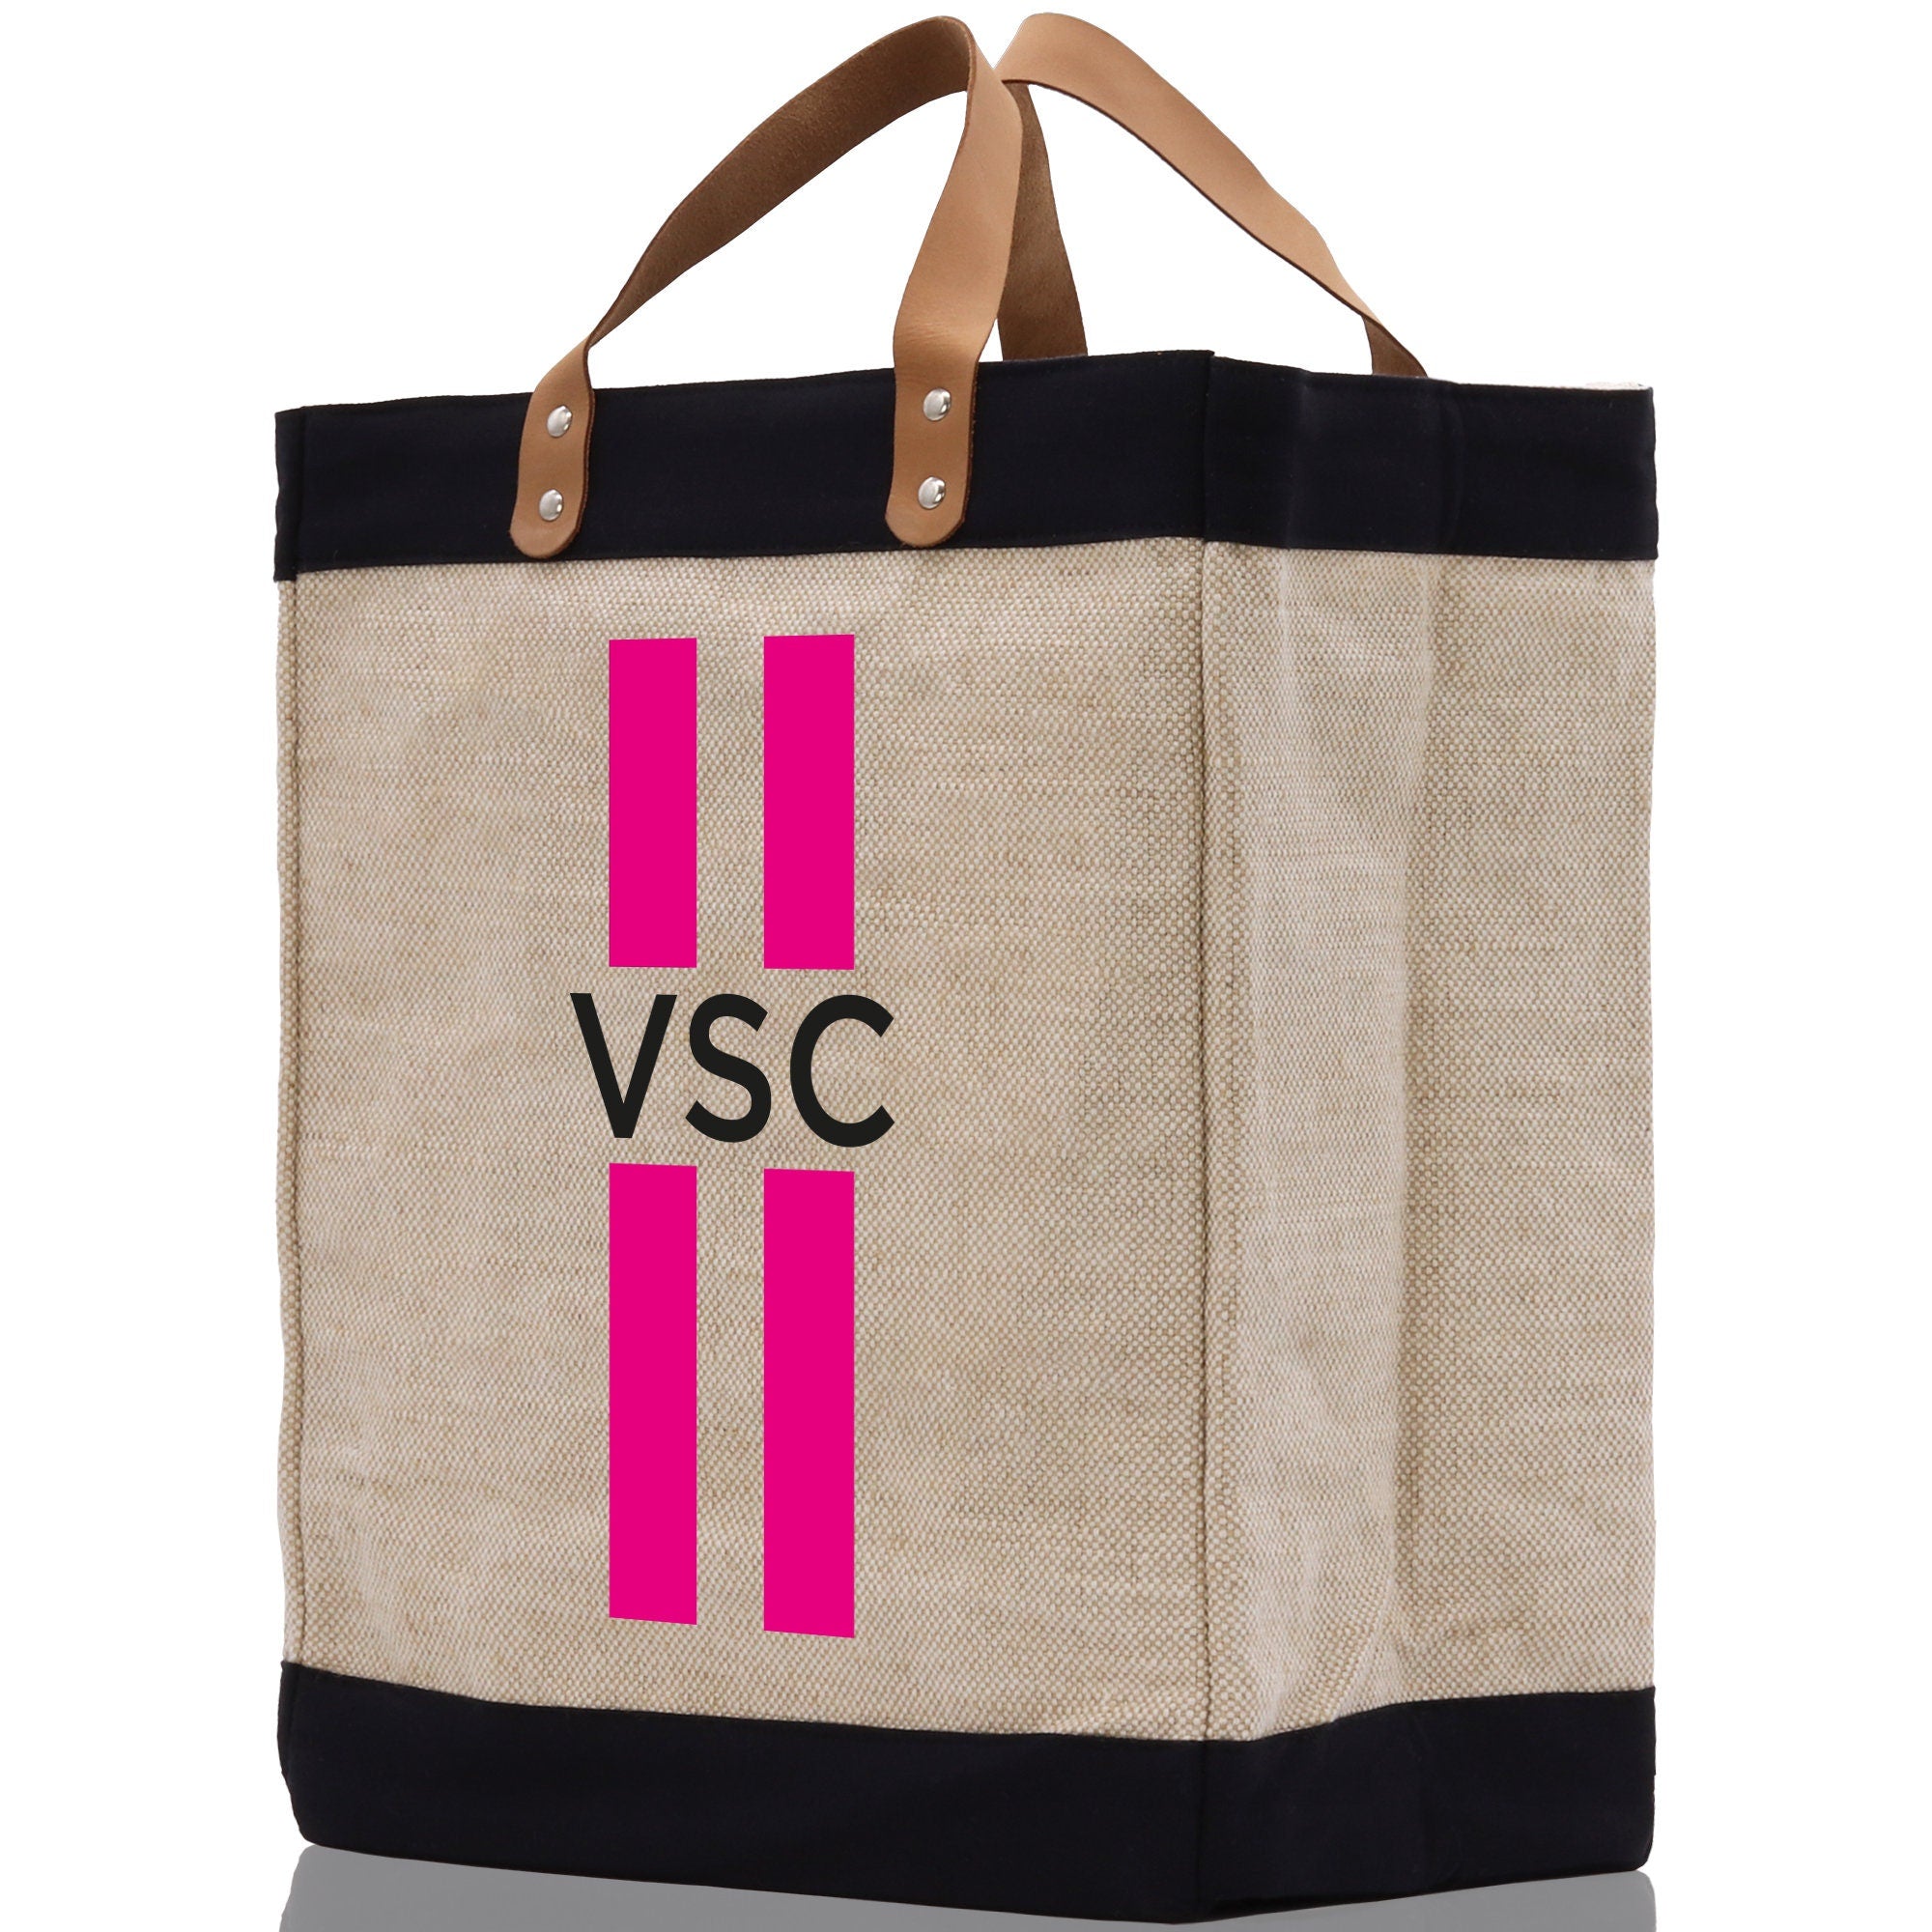 a canvas tote bag with pink and black stripes